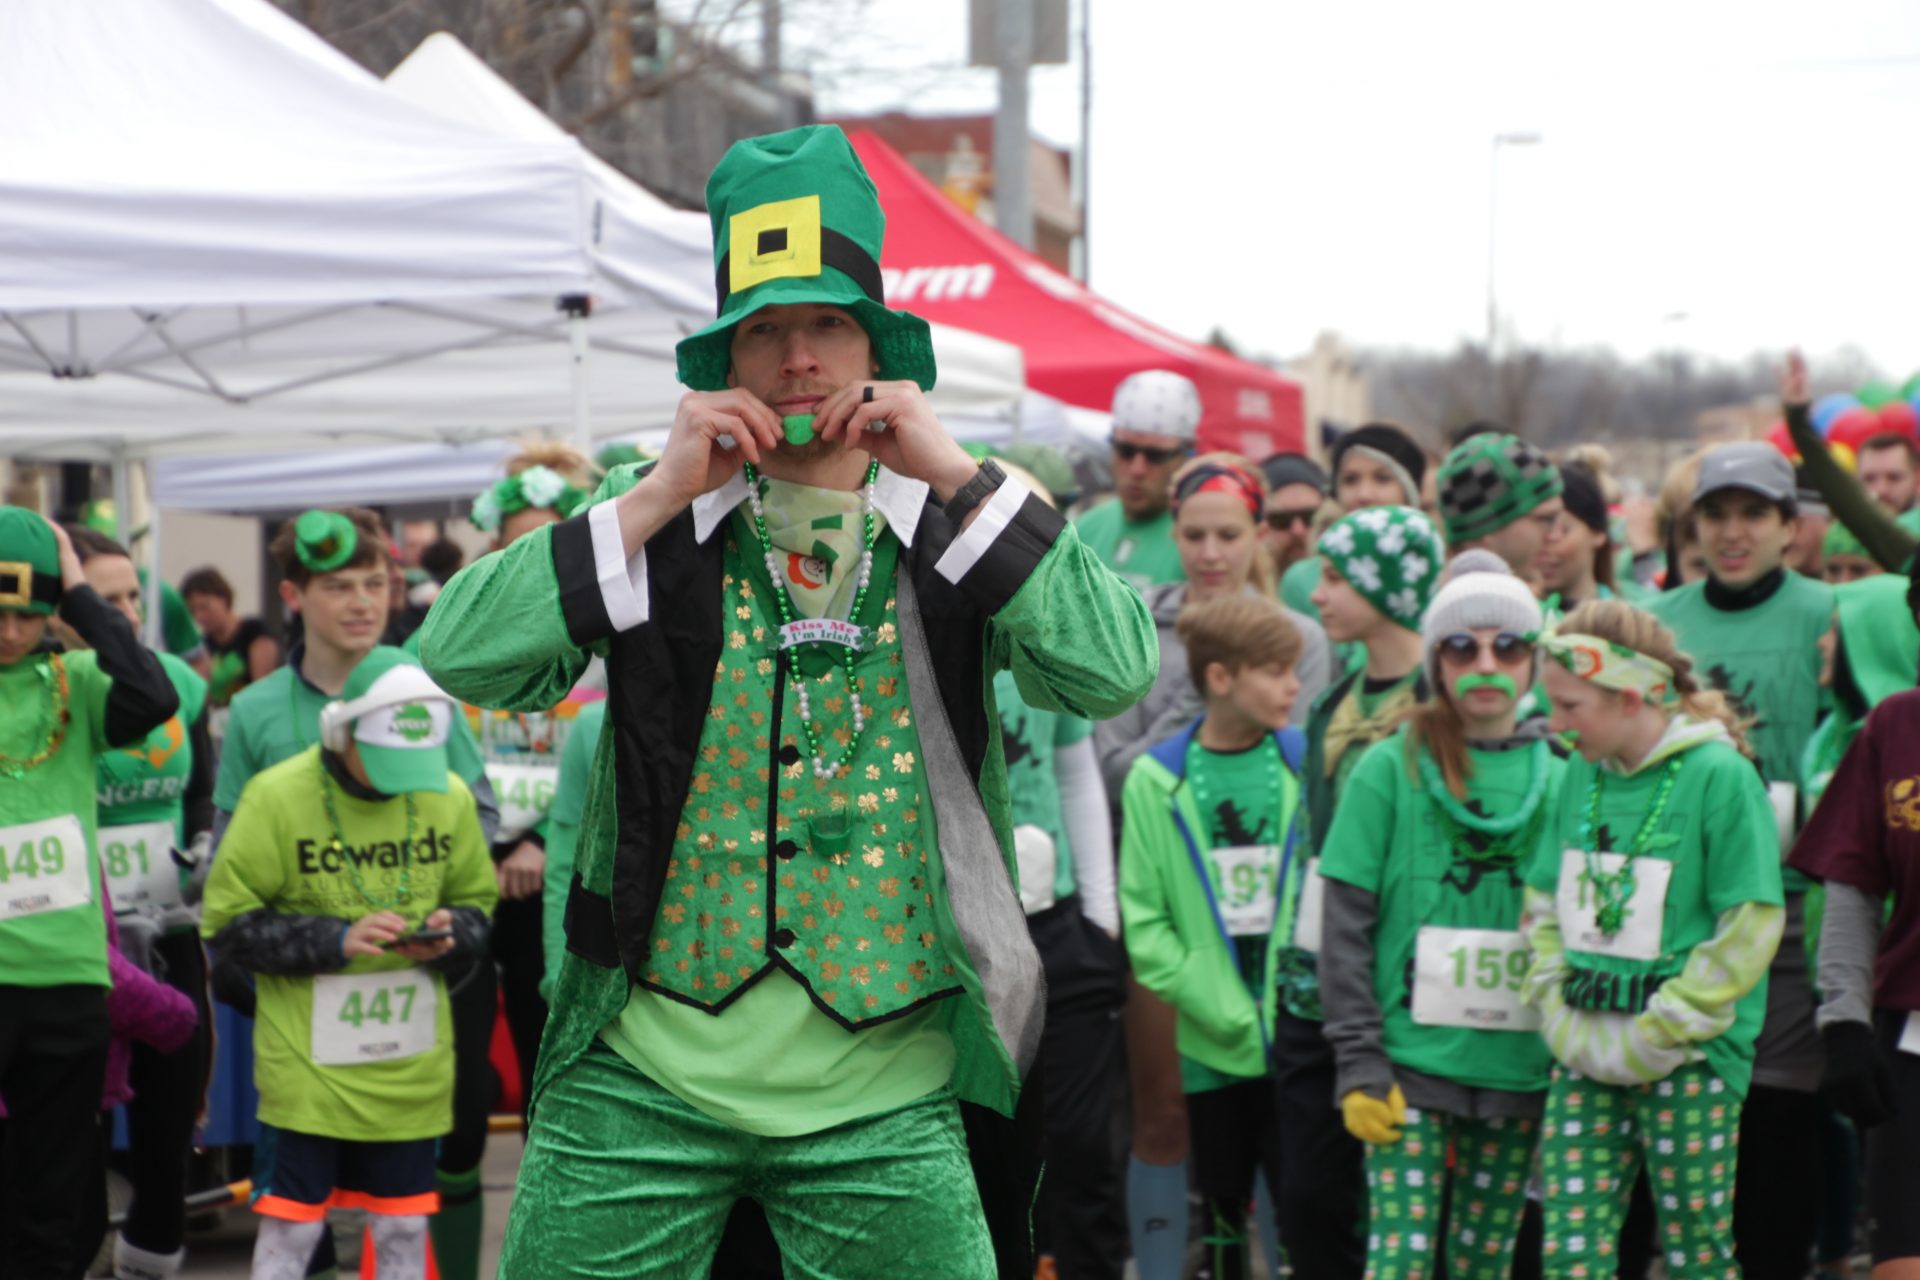 5 Things Being Done To Make the Shamrock Shuffle a Safe Event The 712